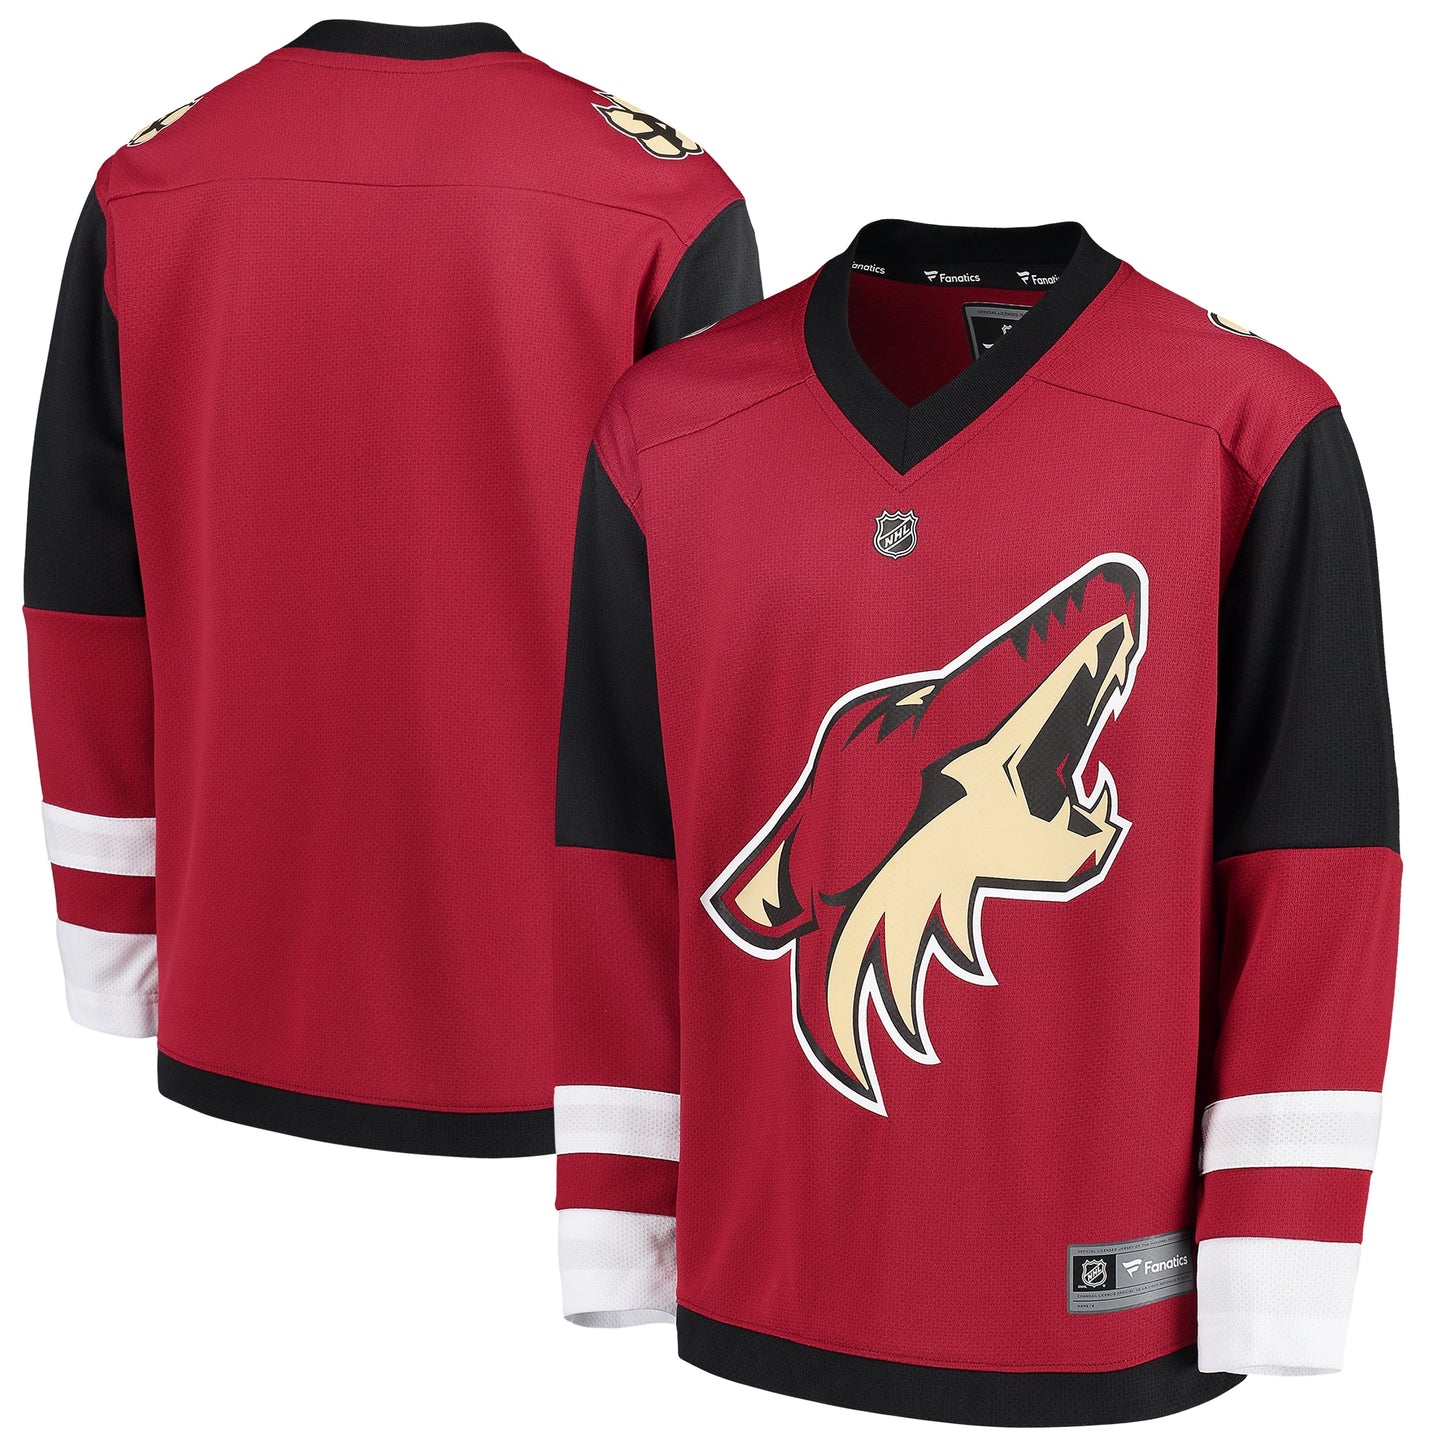 Arizona Coyotes Fanatics Branded Youth Home Replica Blank Jersey - Red